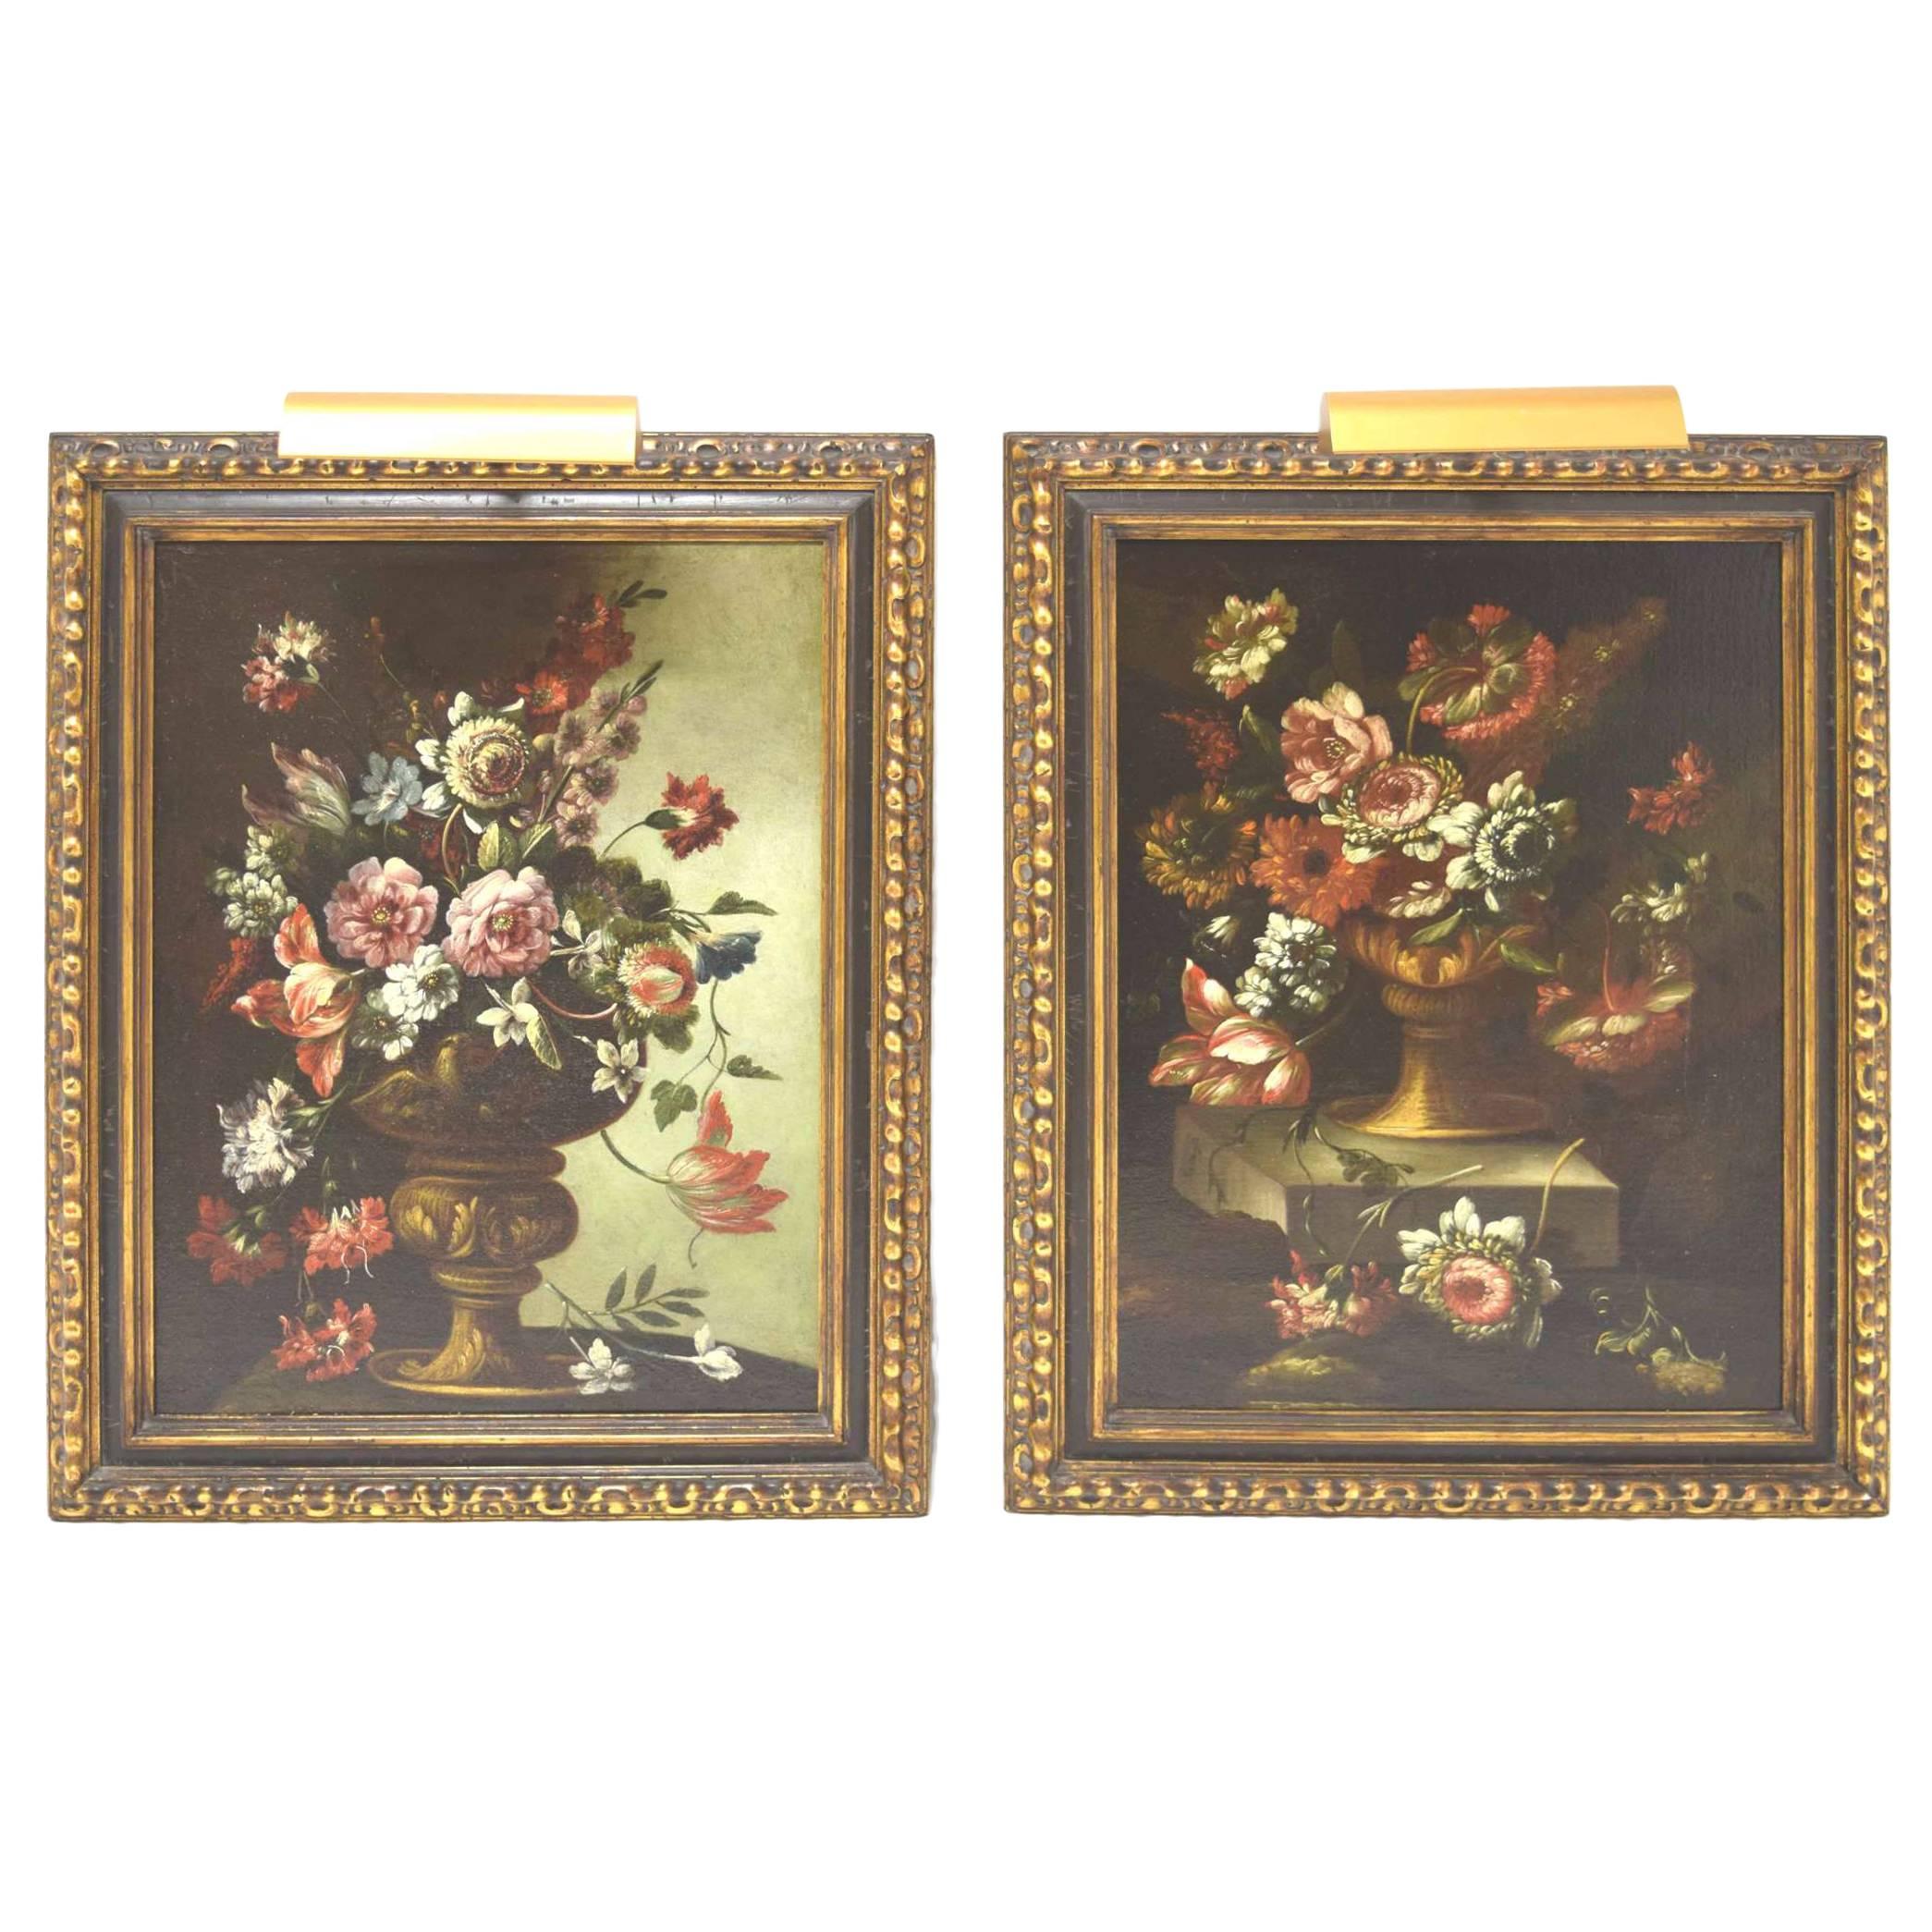 Superb Pair of 18th Century Flemish Floral Still Life Paintings, circa 1760 For Sale